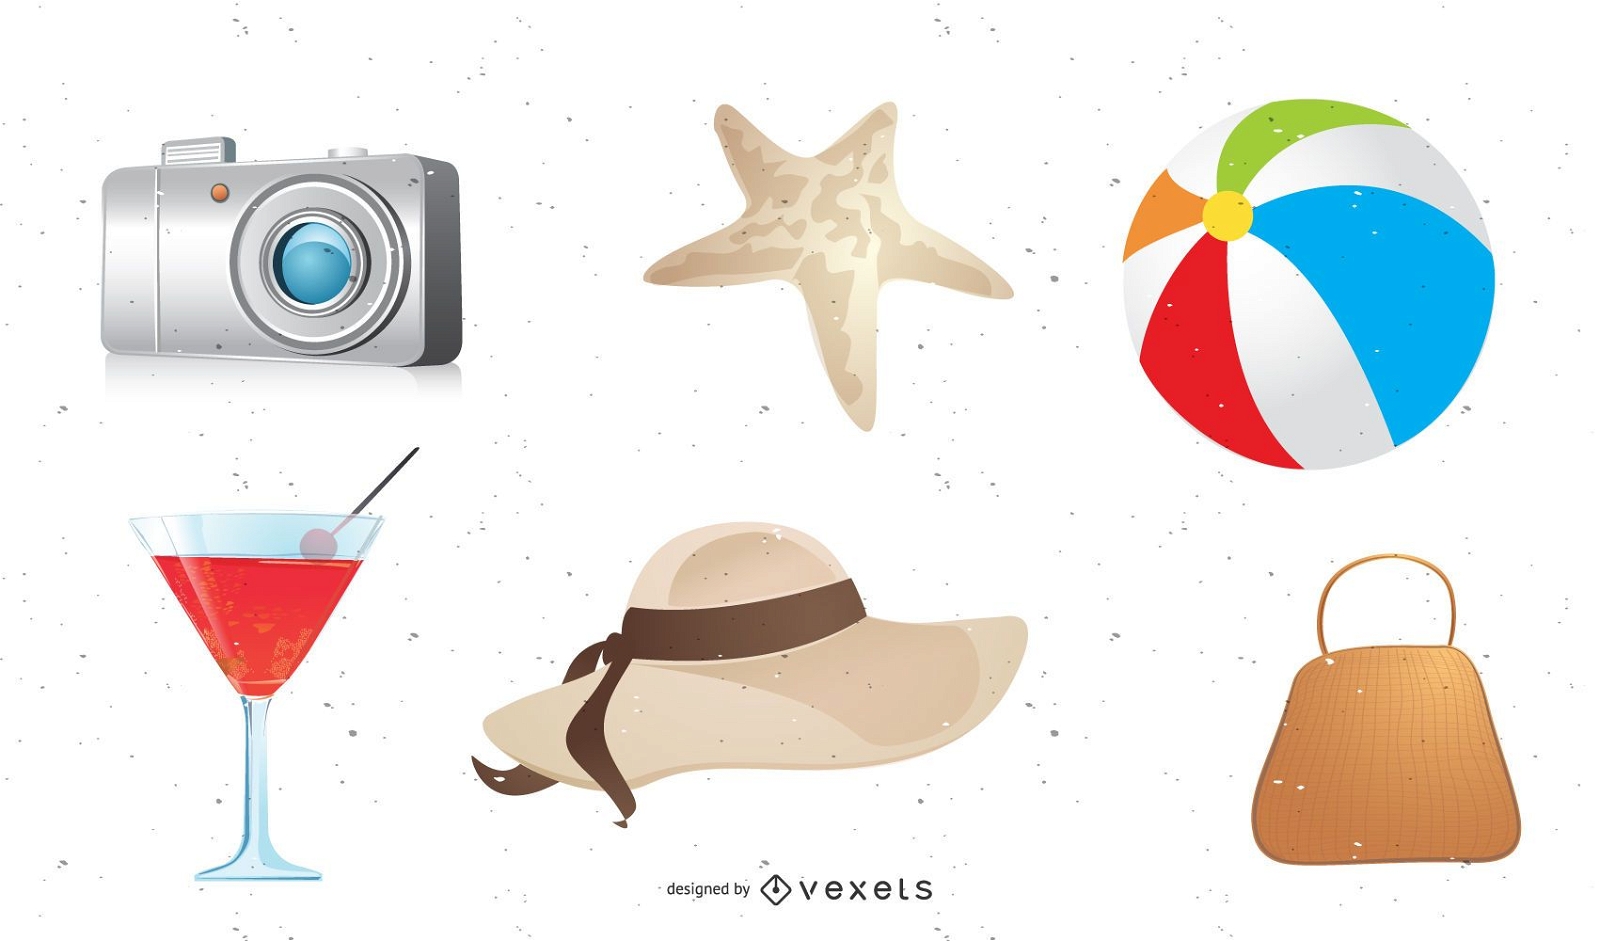 Summer Vector Icons